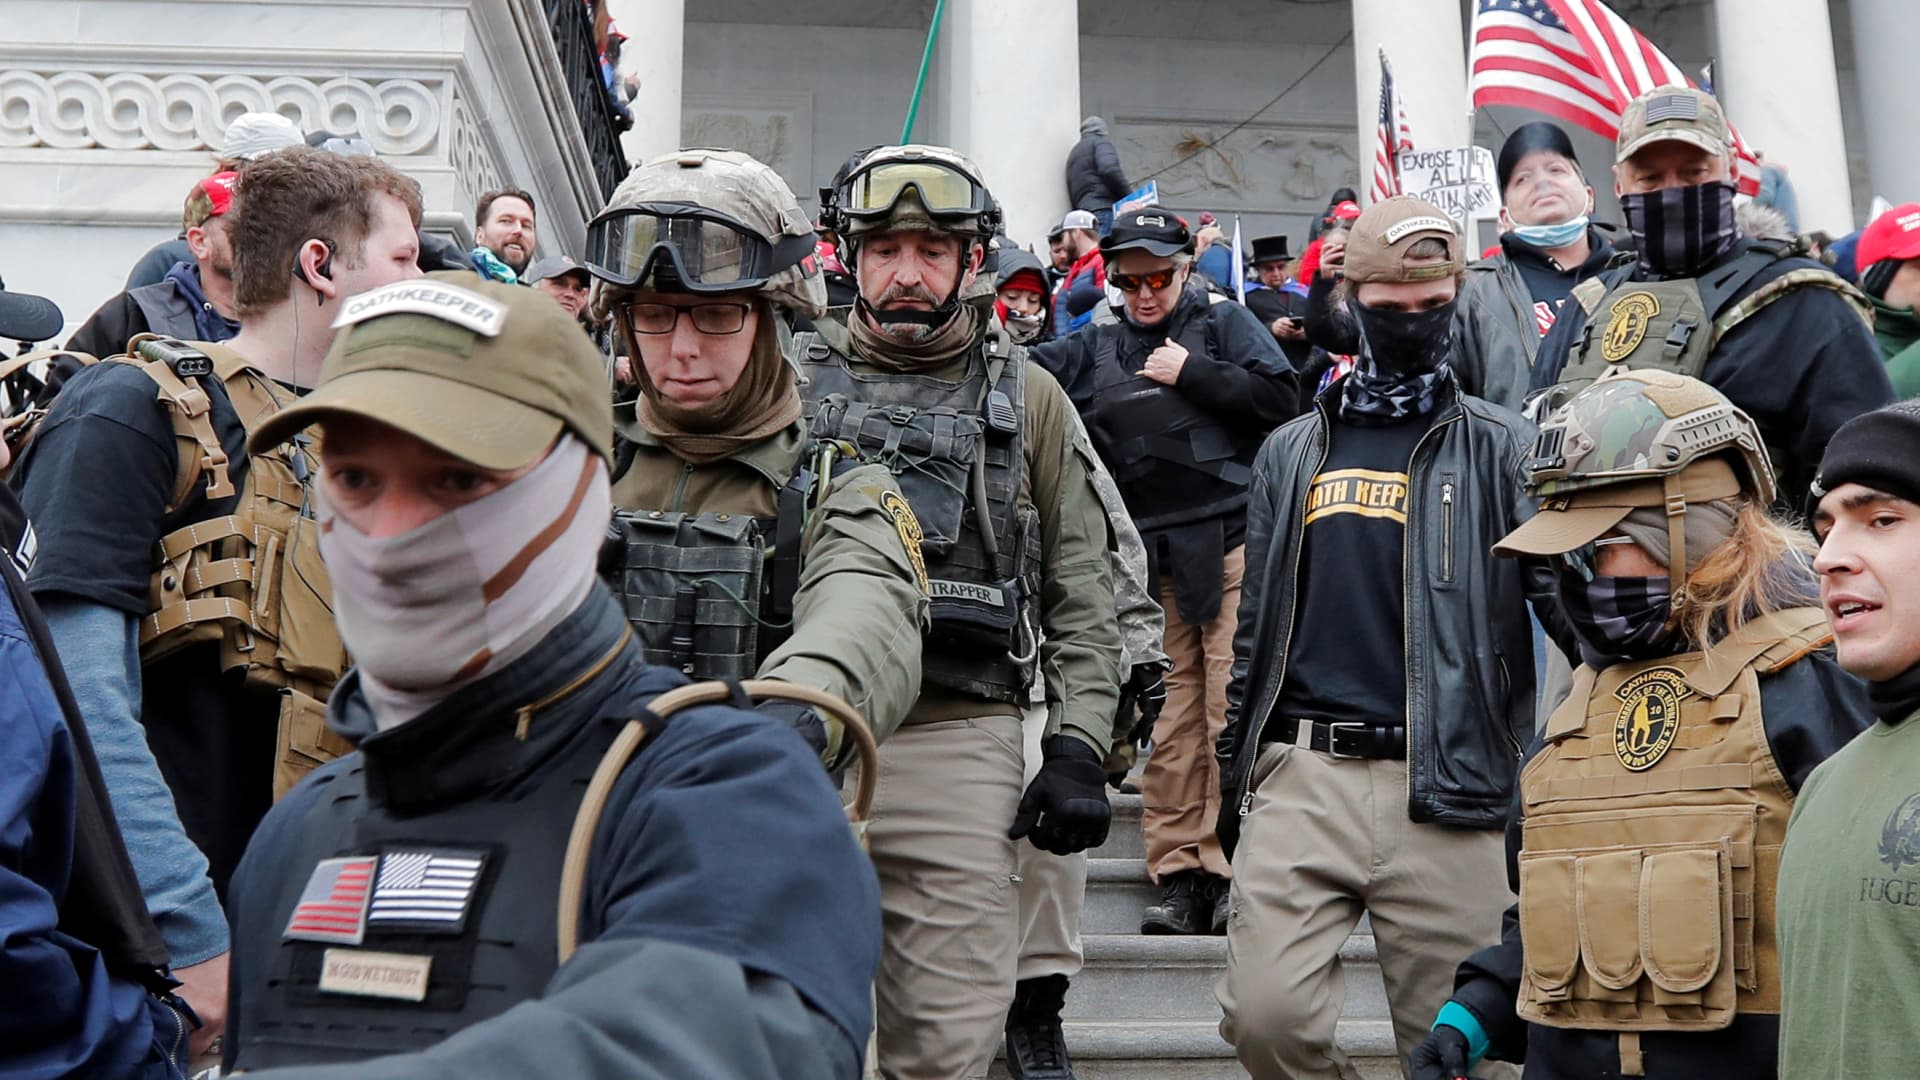 Jessica Marie Watkins (2nd from L) and Donovan Ray Crowl (Center), both from Ohio, march down the east front steps of the U.S. Capitol with the Oath Keepers militia group among supporters of U.S. President Donald Trump in Washington, January 6, 2021. Both have since been indicted by federal authorities for their roles in the siege on the U.S. Capitol.